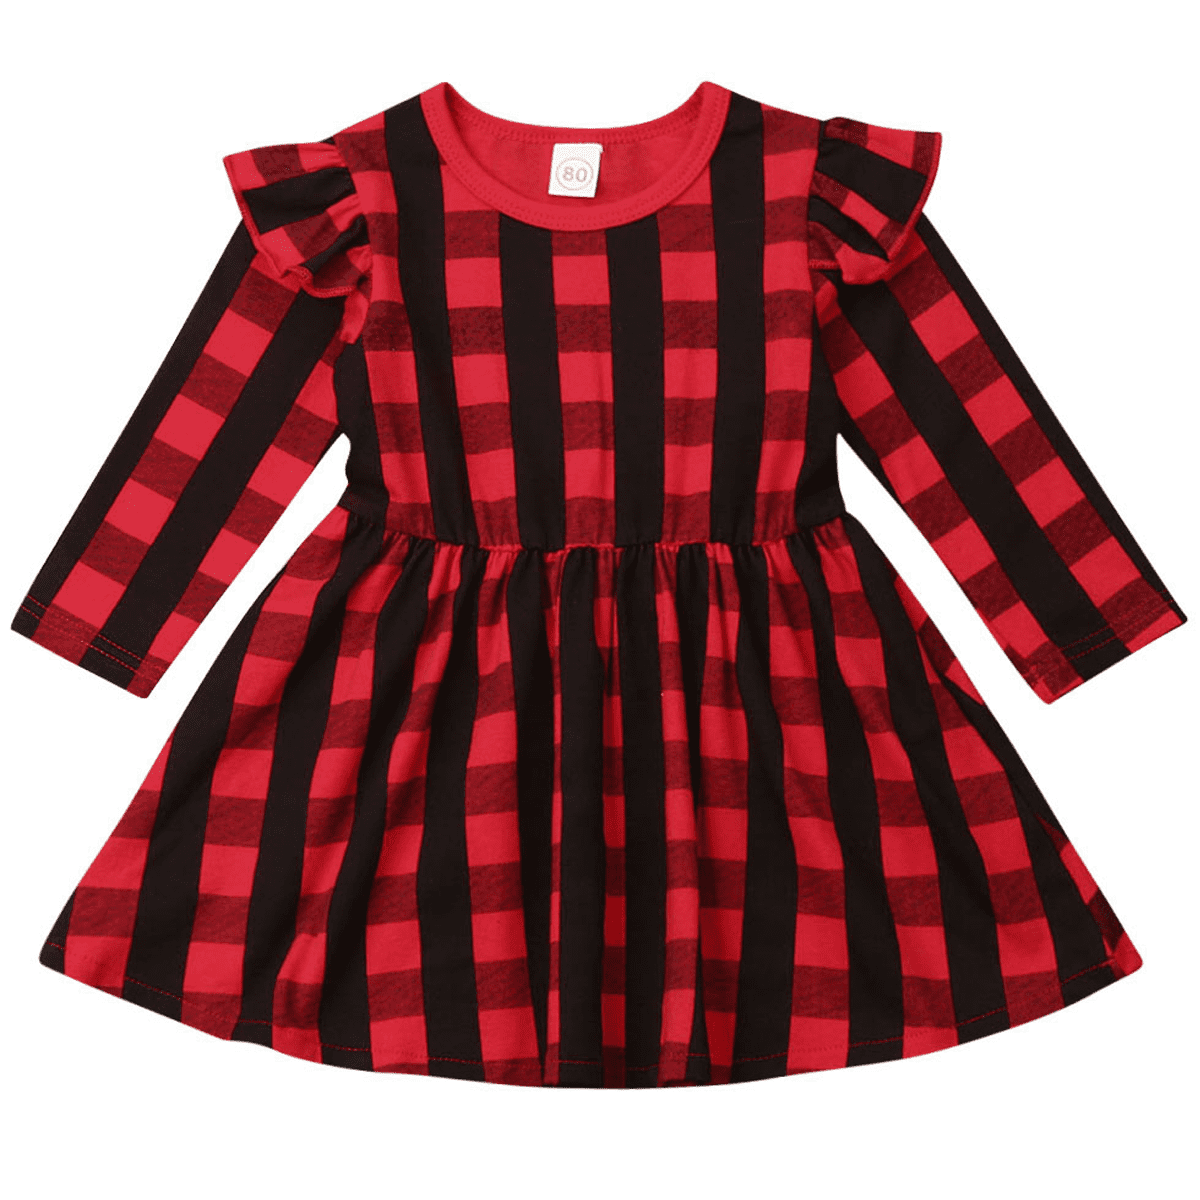 Infant Baby Girls Christmas Dress Red Plaid Splice Skirt with Bowknot Headband Party Dress Outfits 